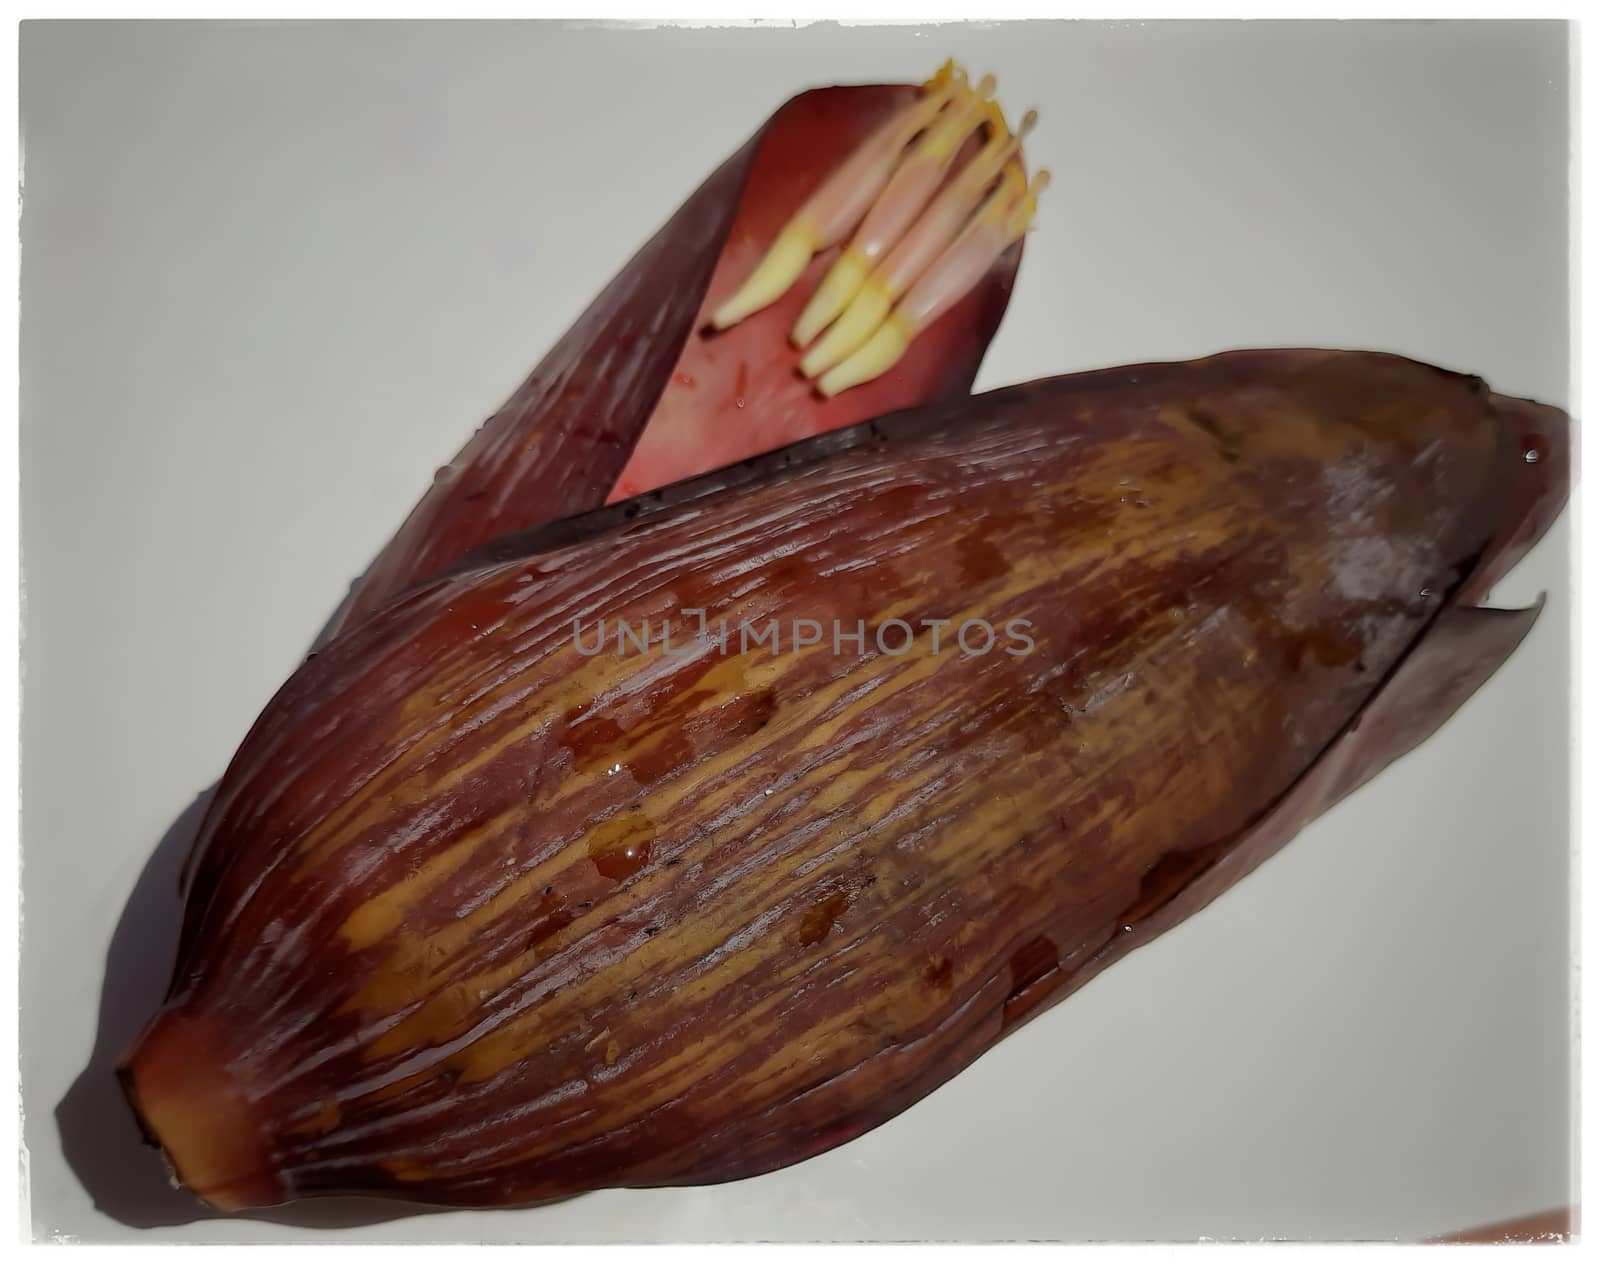 Banana flower with small flower inside placed beautifully in white paper controls diabetes cancer and heart disease supports menstrual health problem